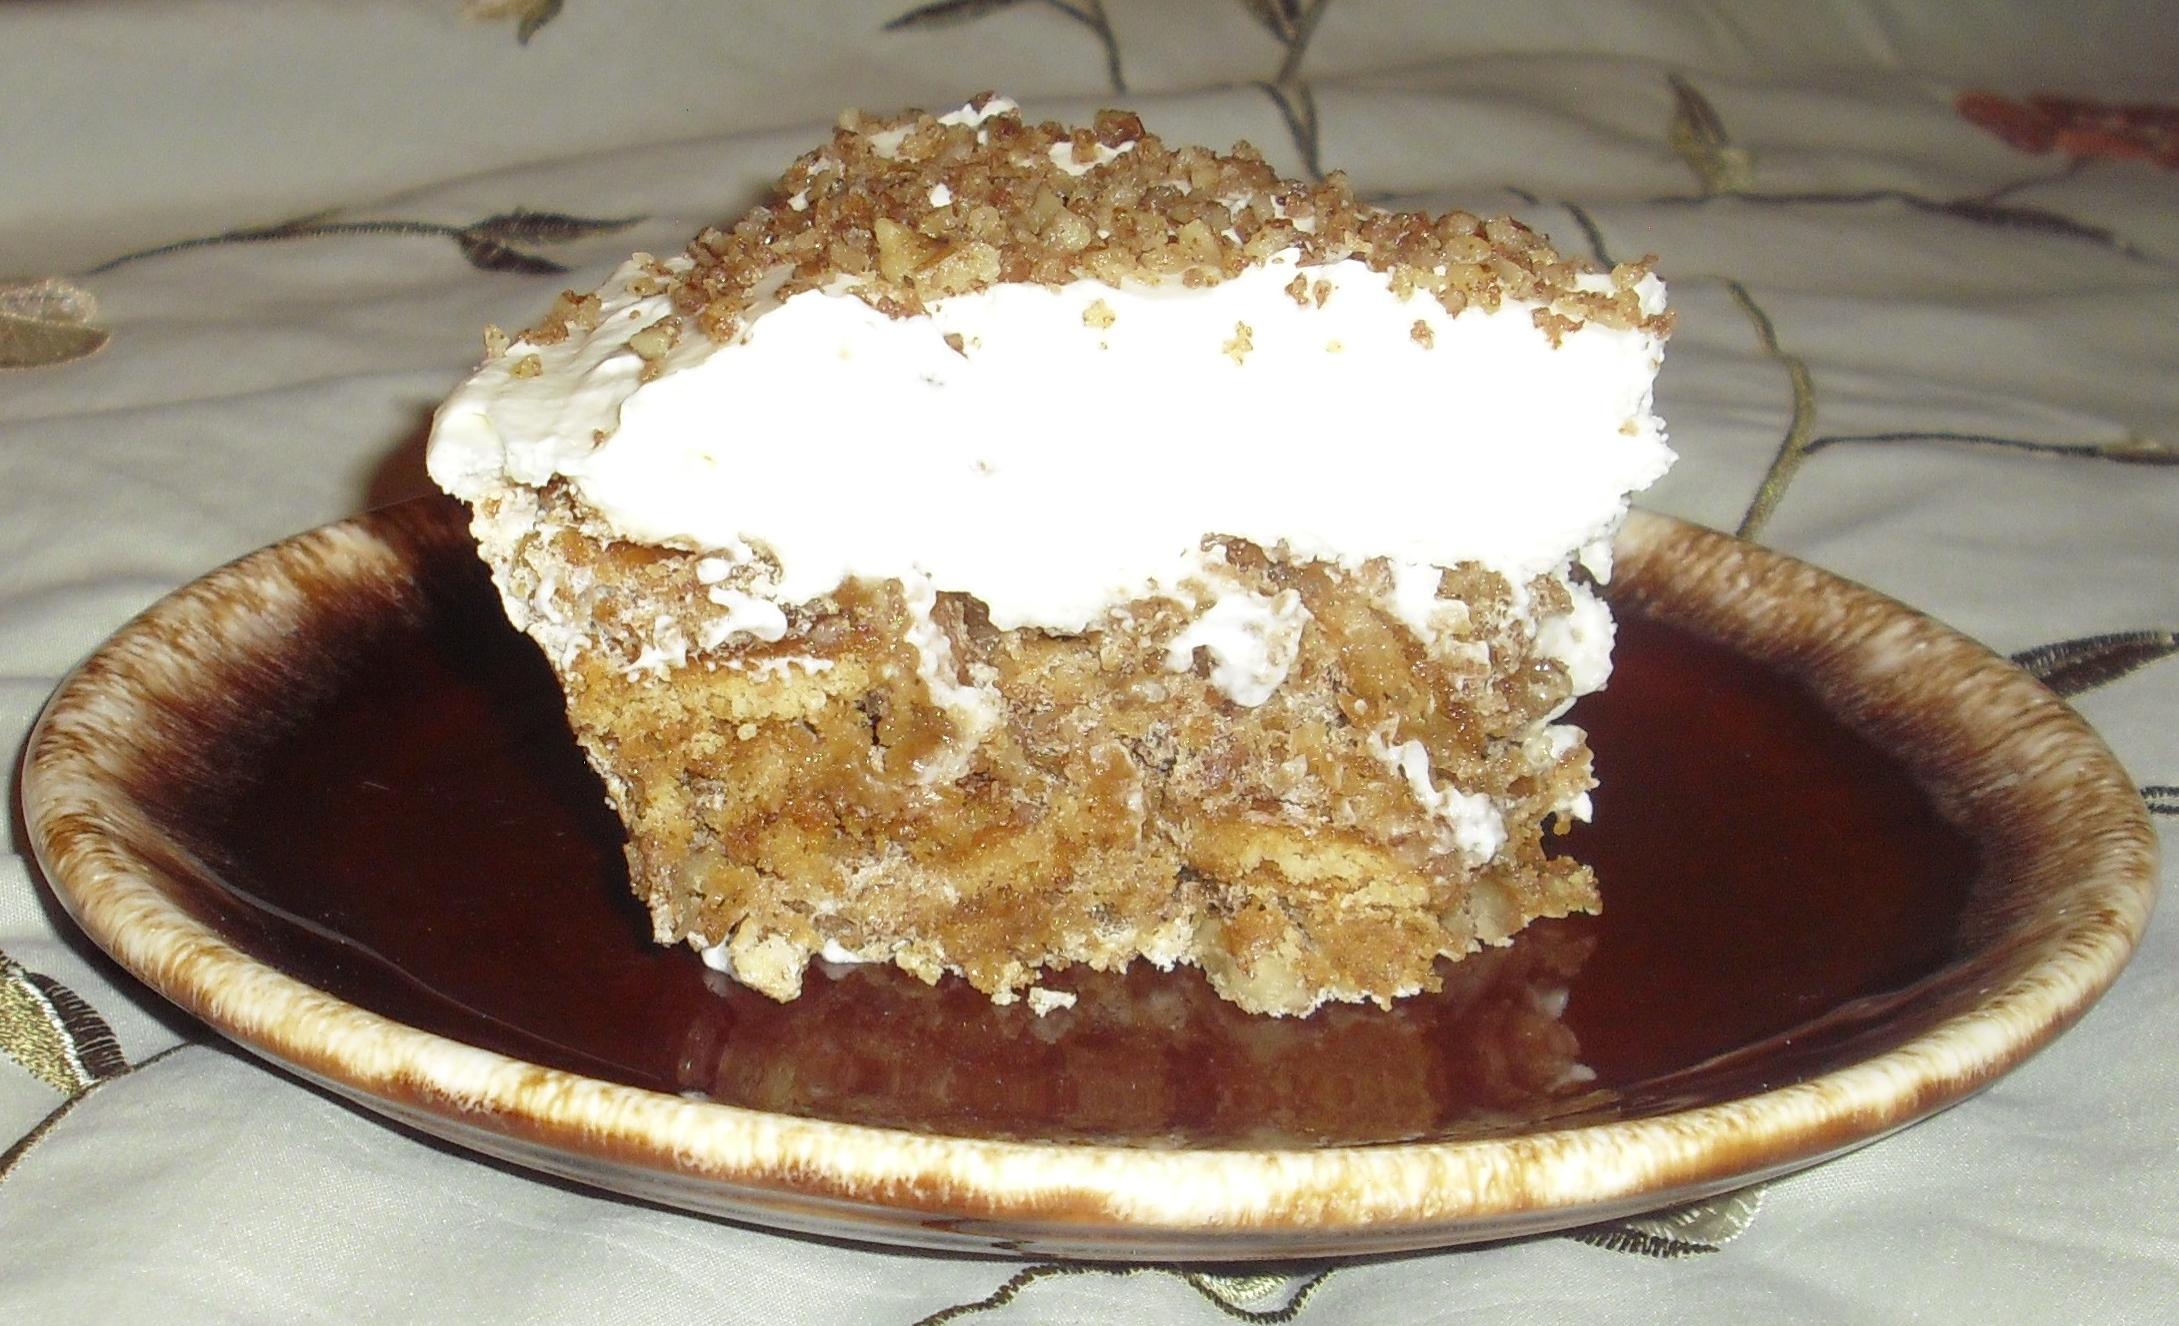  A slice of heaven on a plate – Luby's Cafeteria German Chocolate Pie